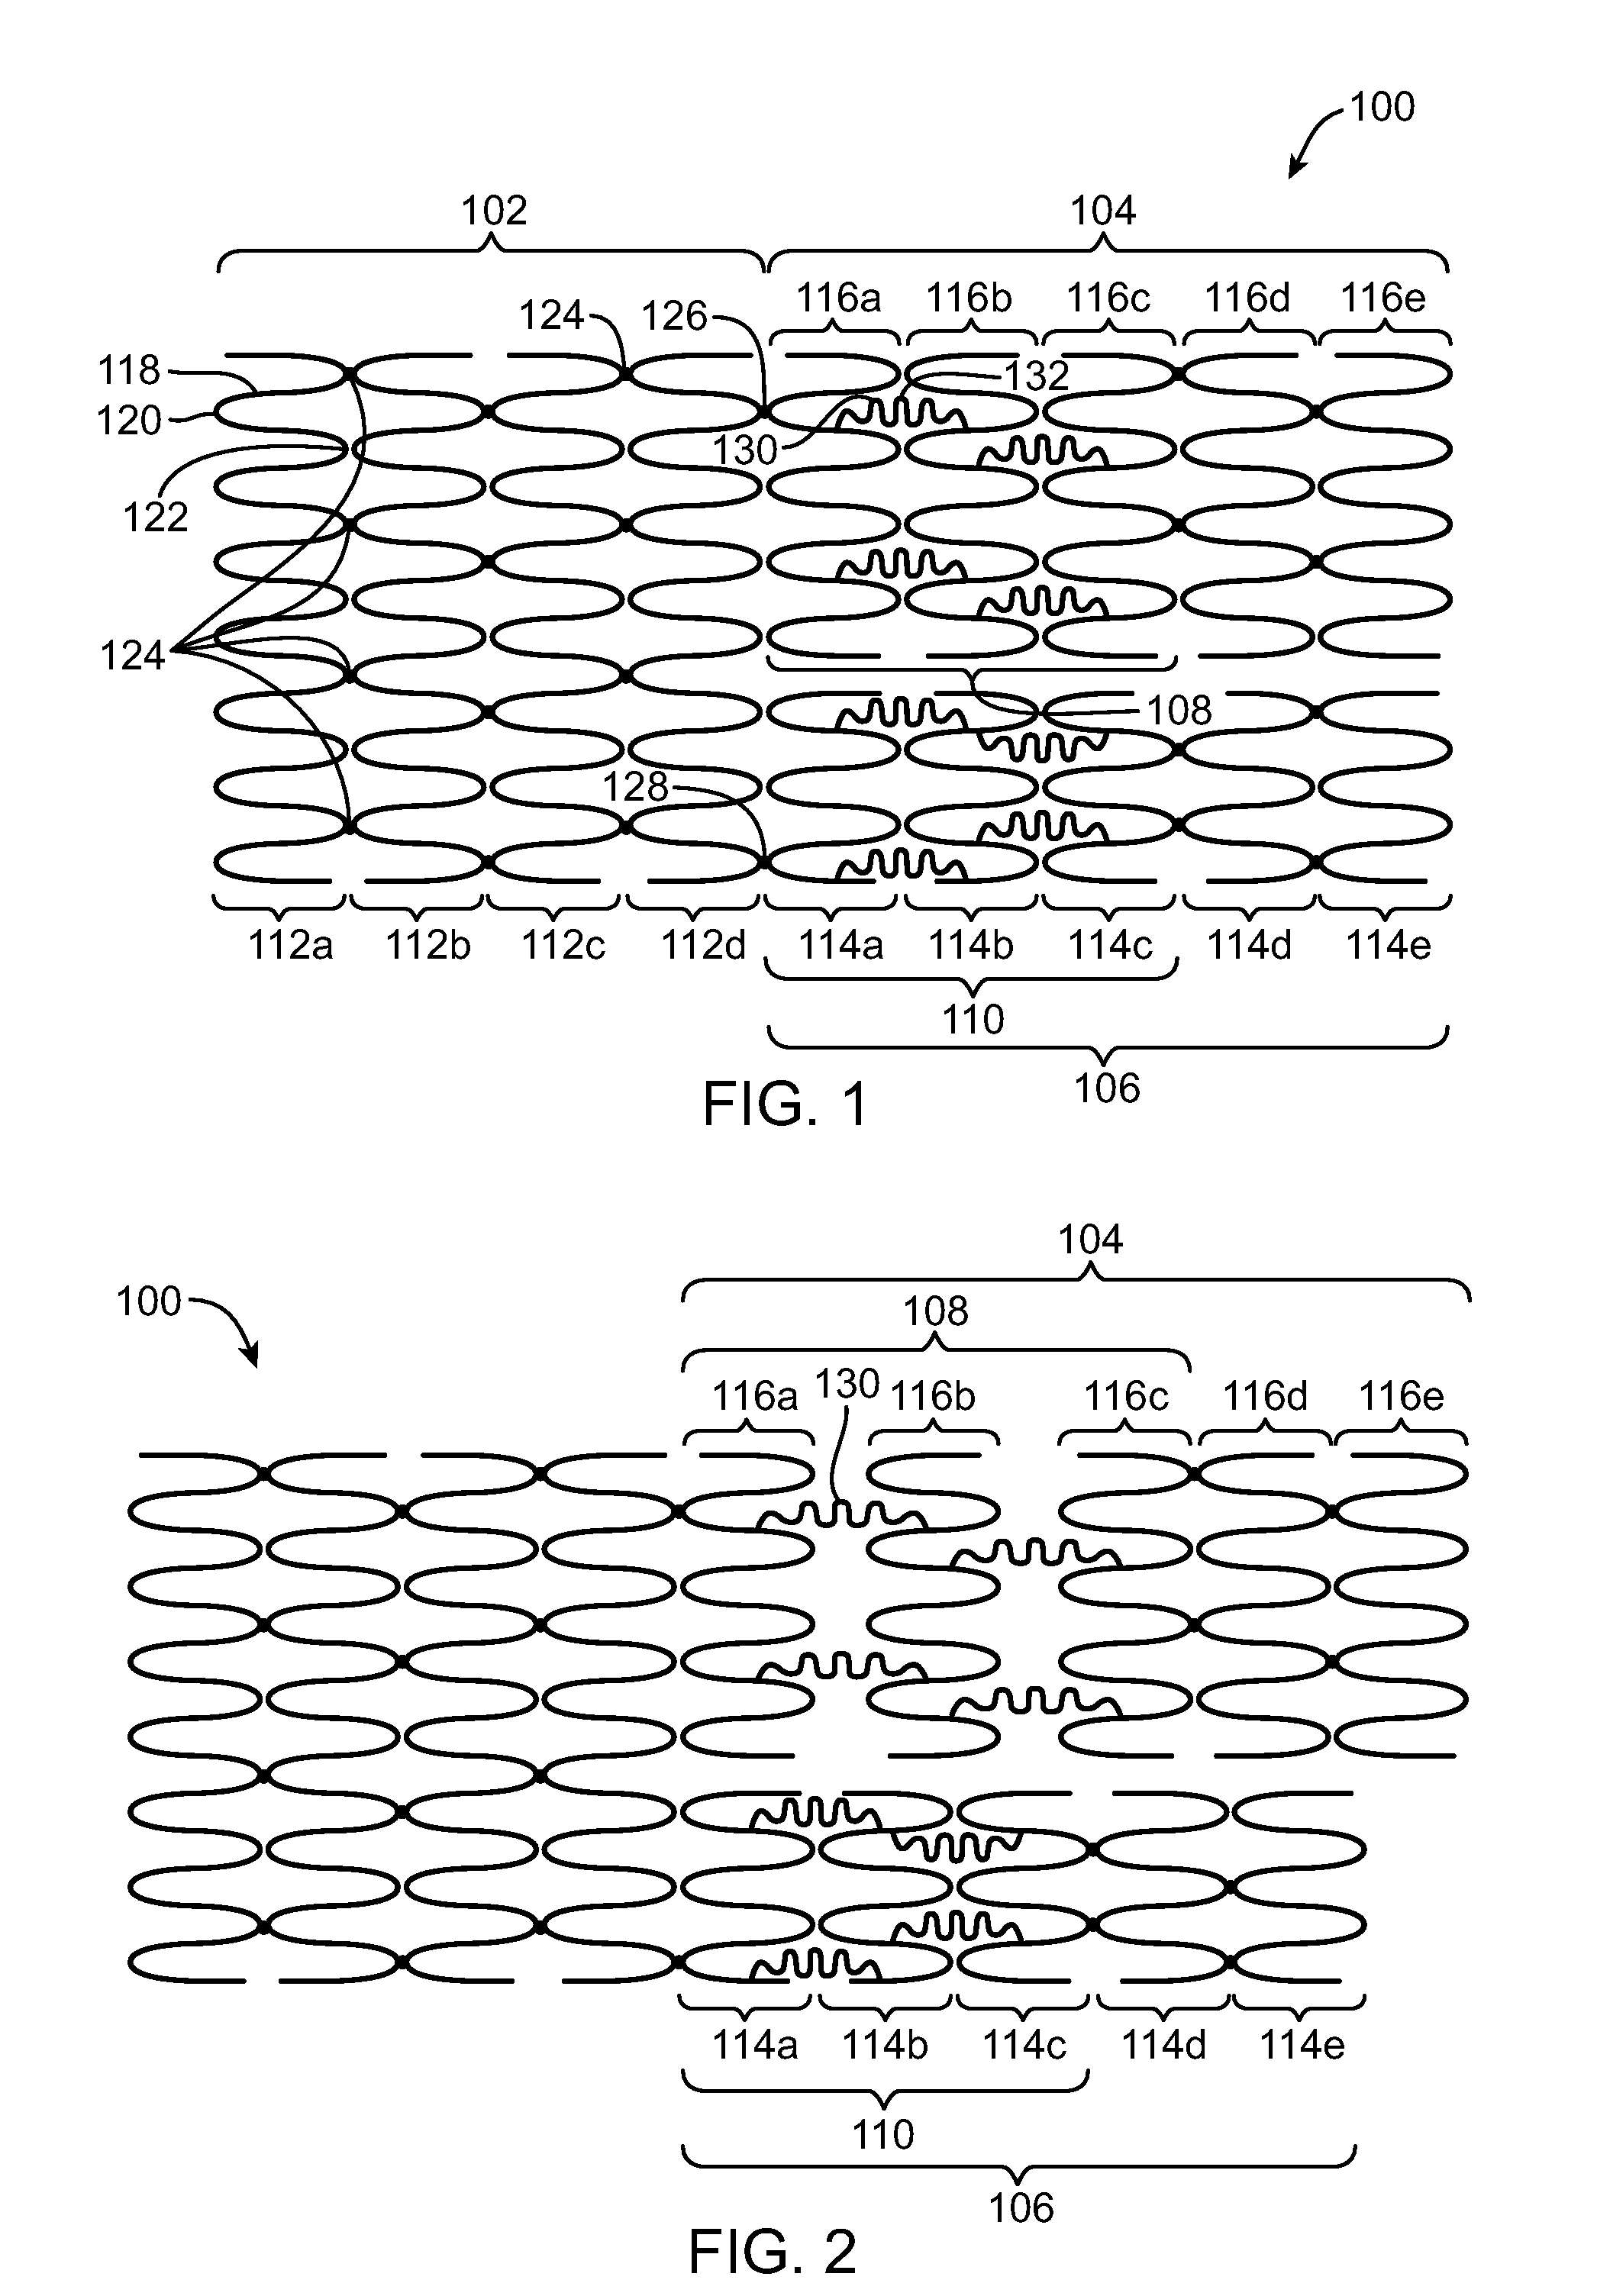 Bifurcated Stent With Variable Length Branches